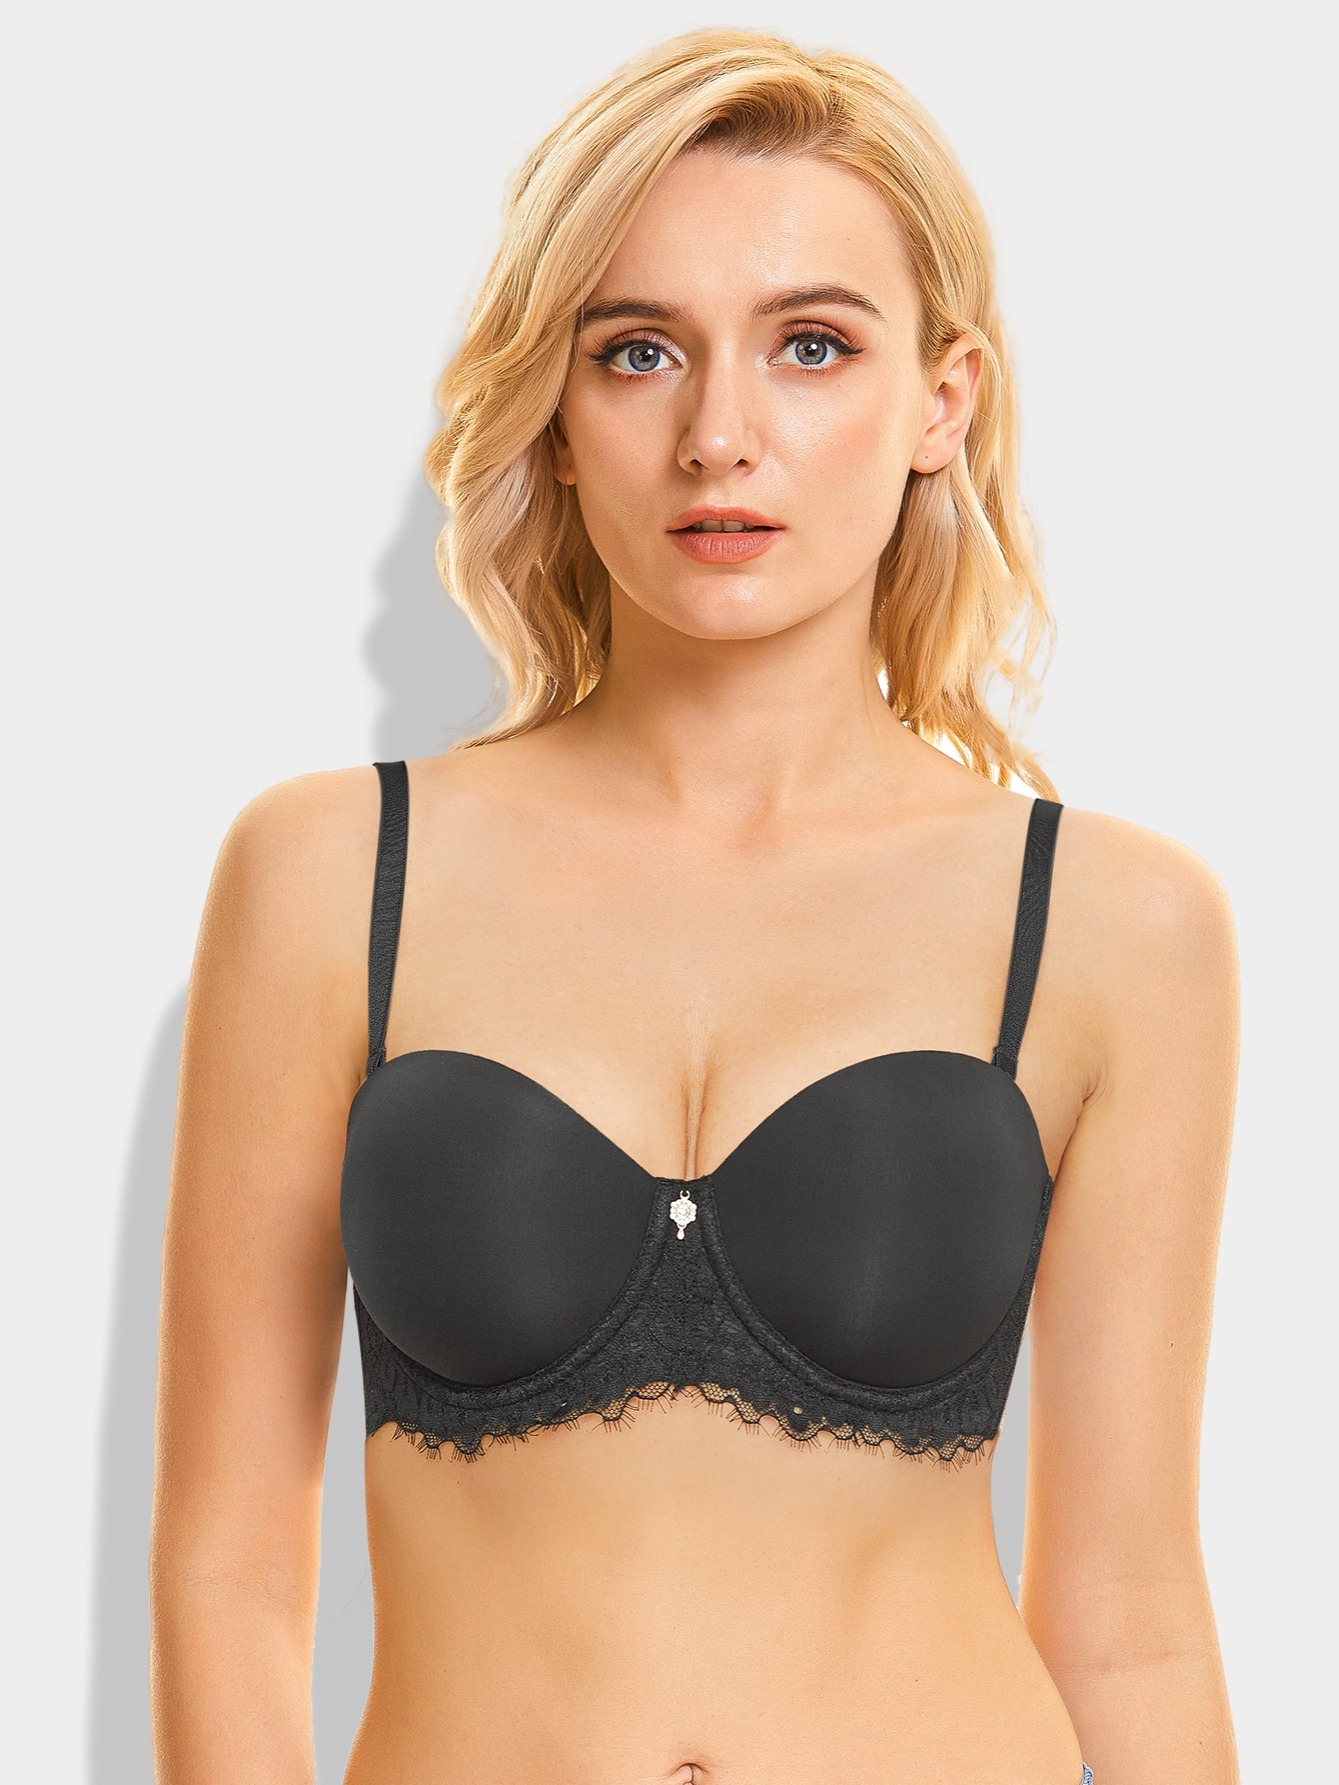 Laced It Up! Non-Slip Strapless Push Up Bra Tagged 38C/85C